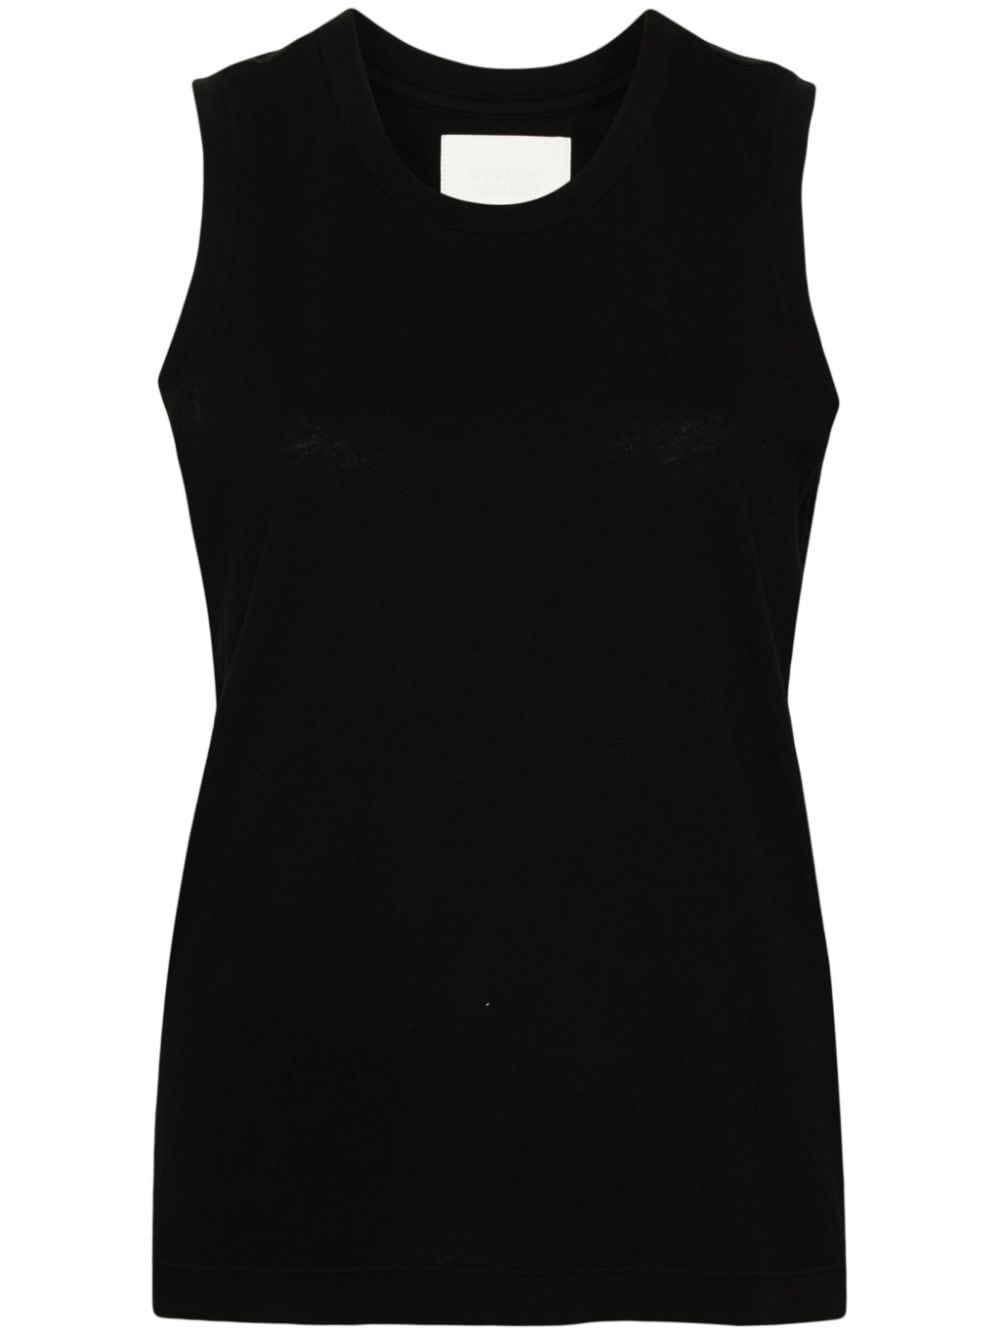 Citizens of Humanity Muscle cotton tank top - Black von Citizens of Humanity